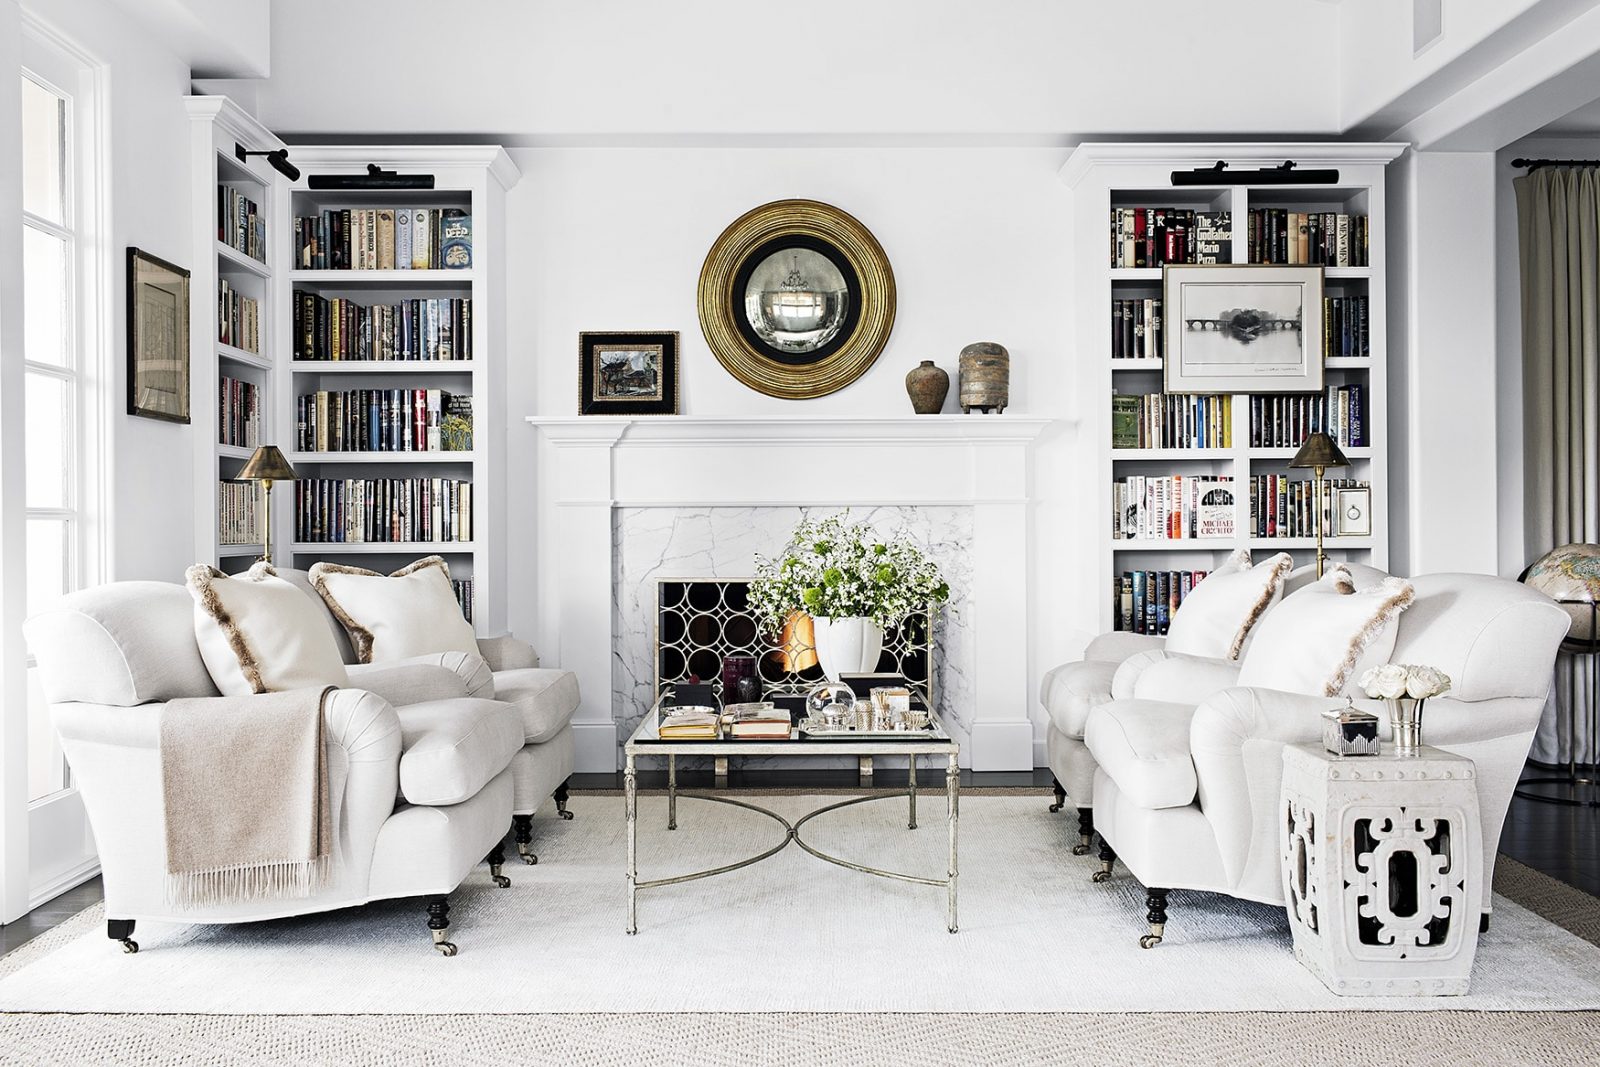 17 Fabulous Ideas Of Fireplace With, Bookcases Next To Stone Fireplace